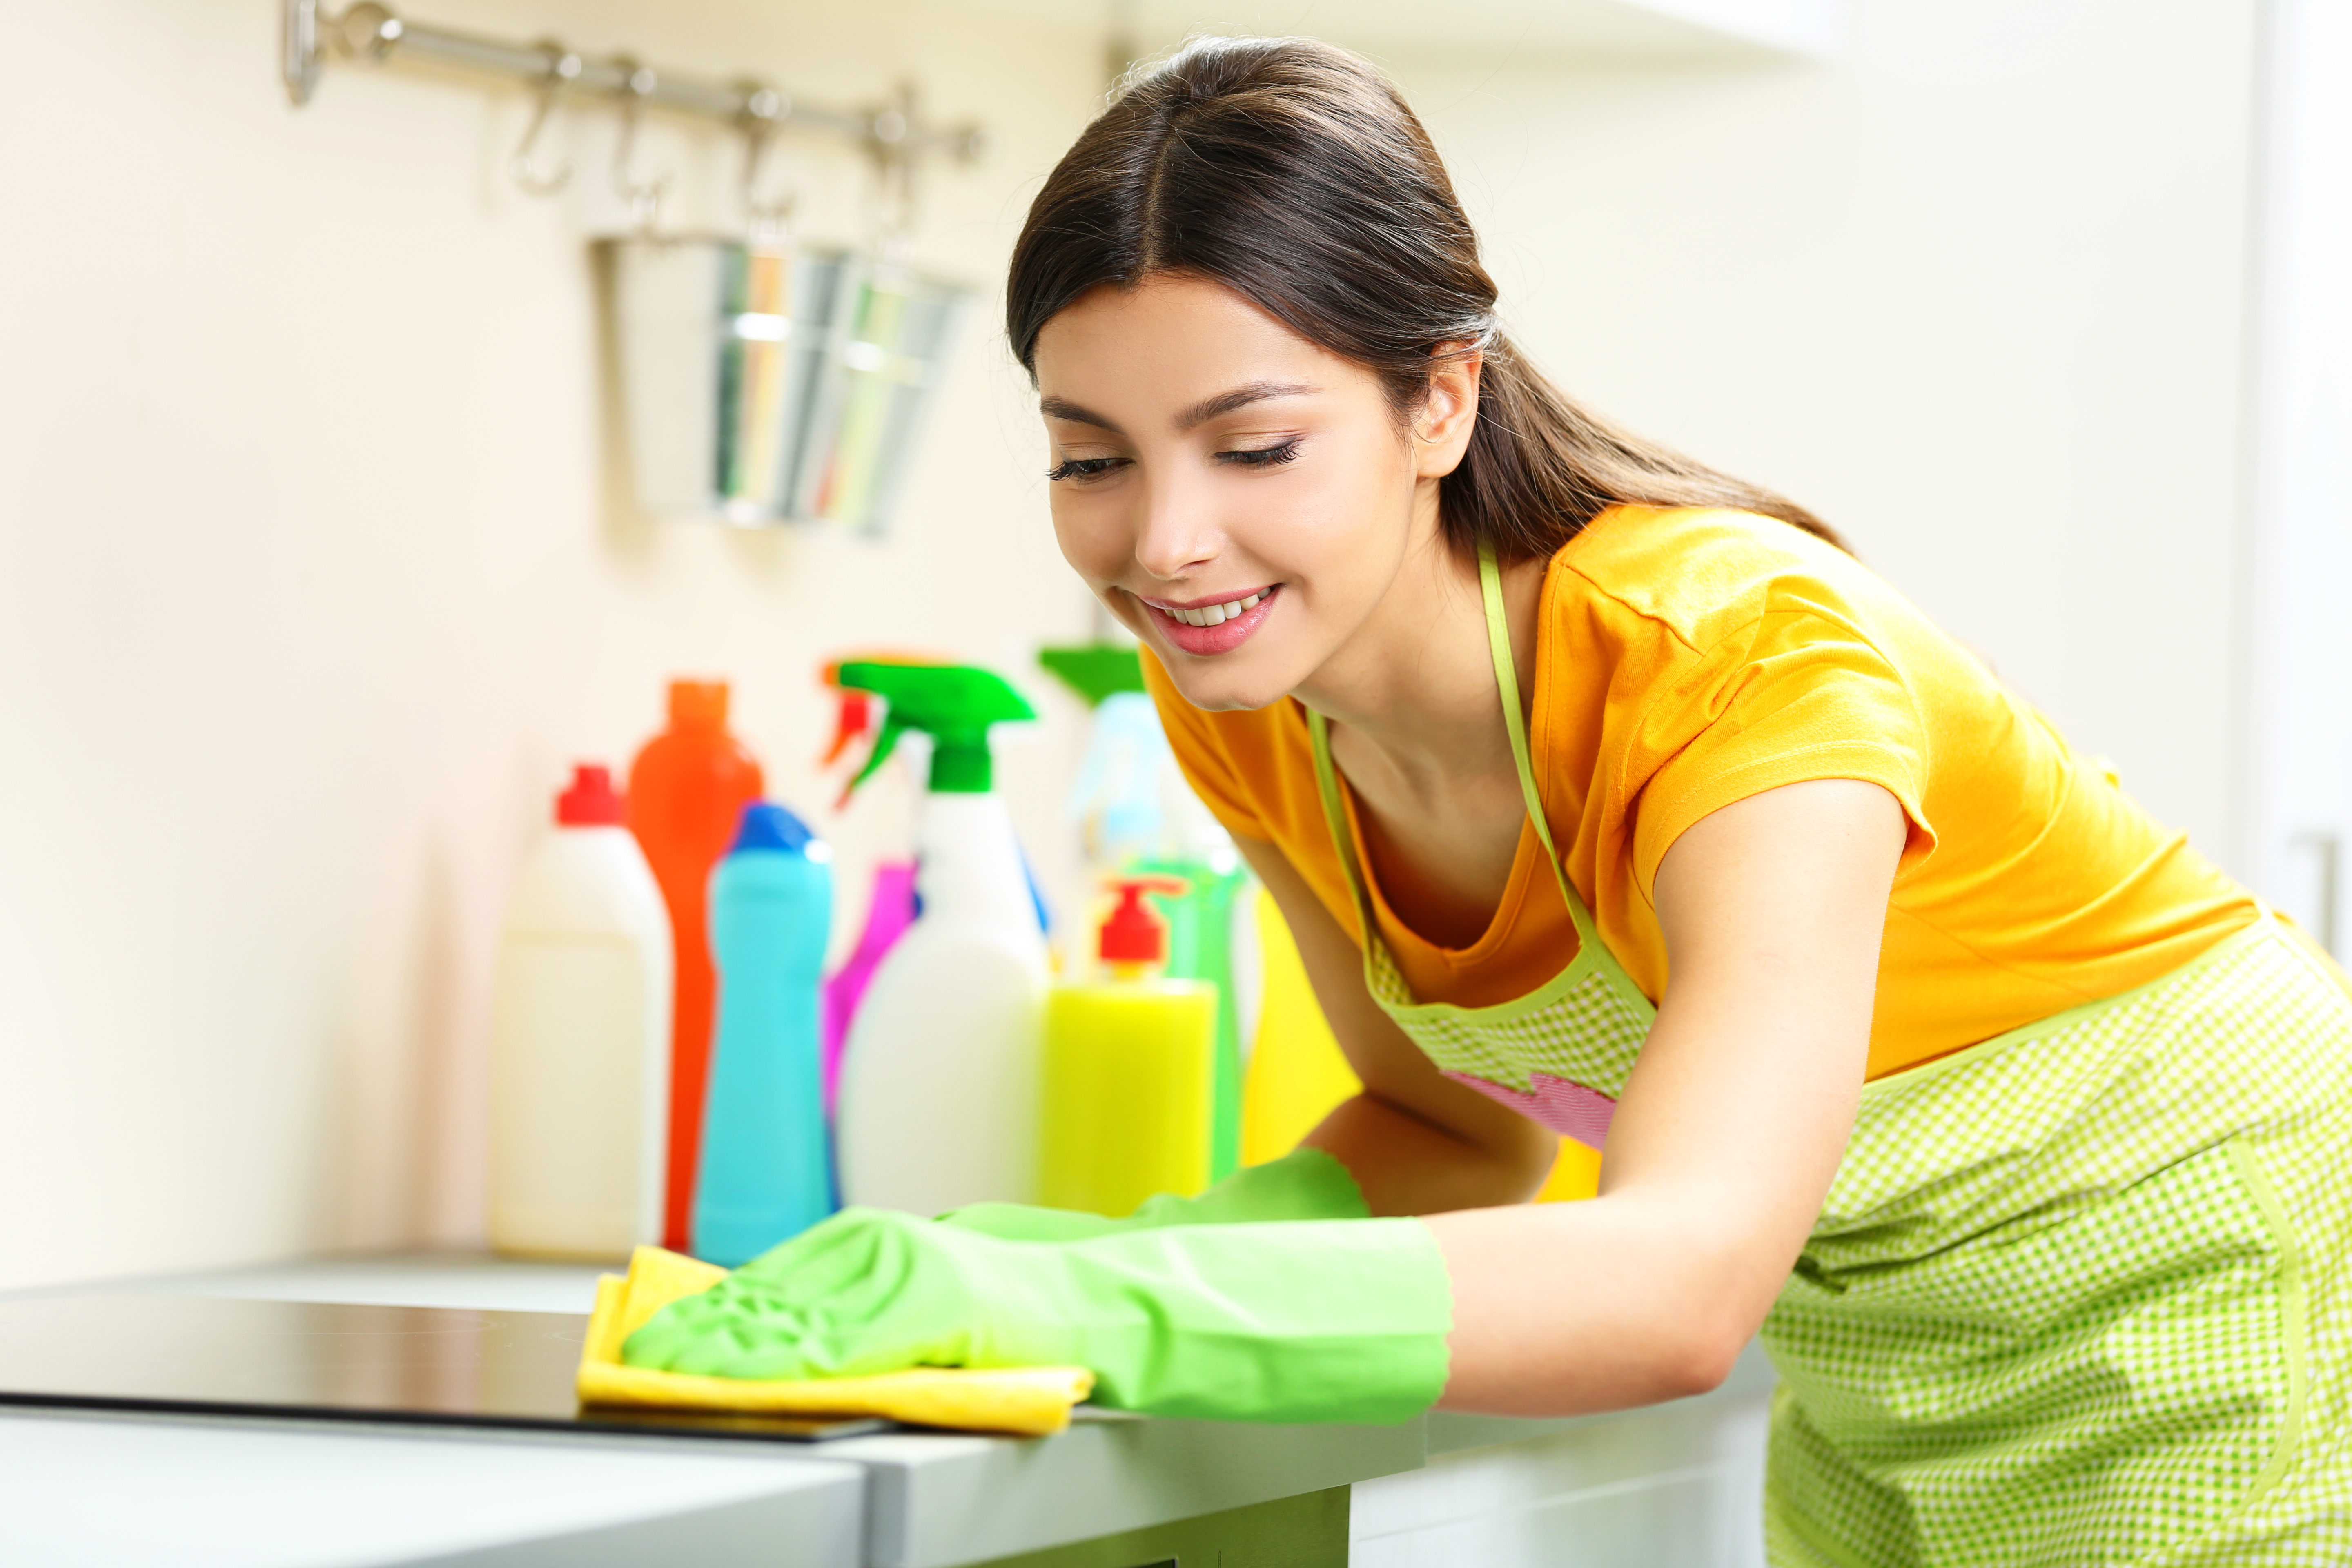 House Cleaning Business For The Holidays